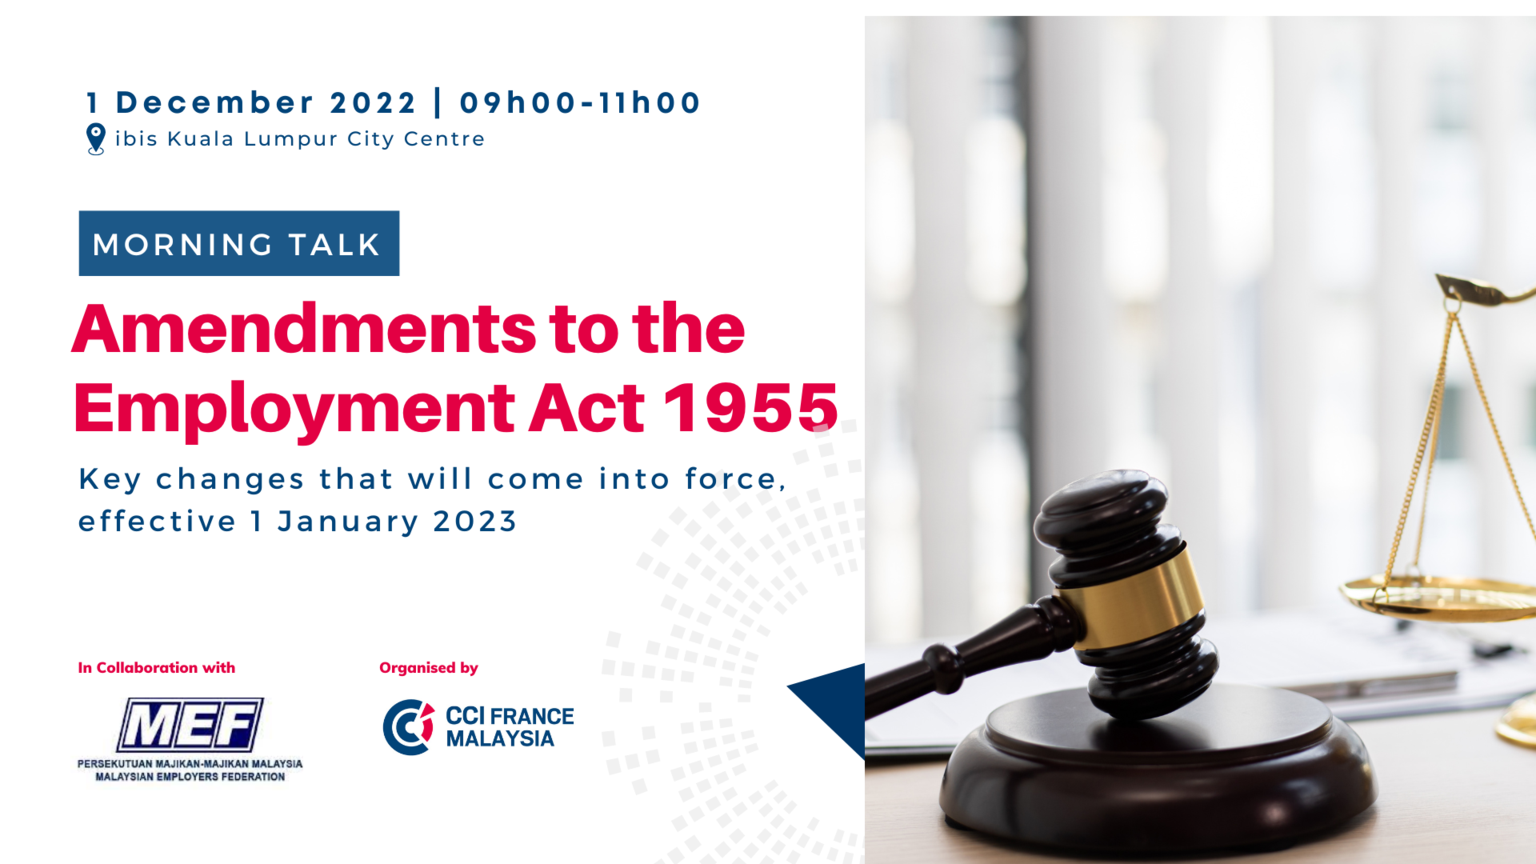 Morning Talk Amendments to the Employment Act 1955 CCI France Malaisie